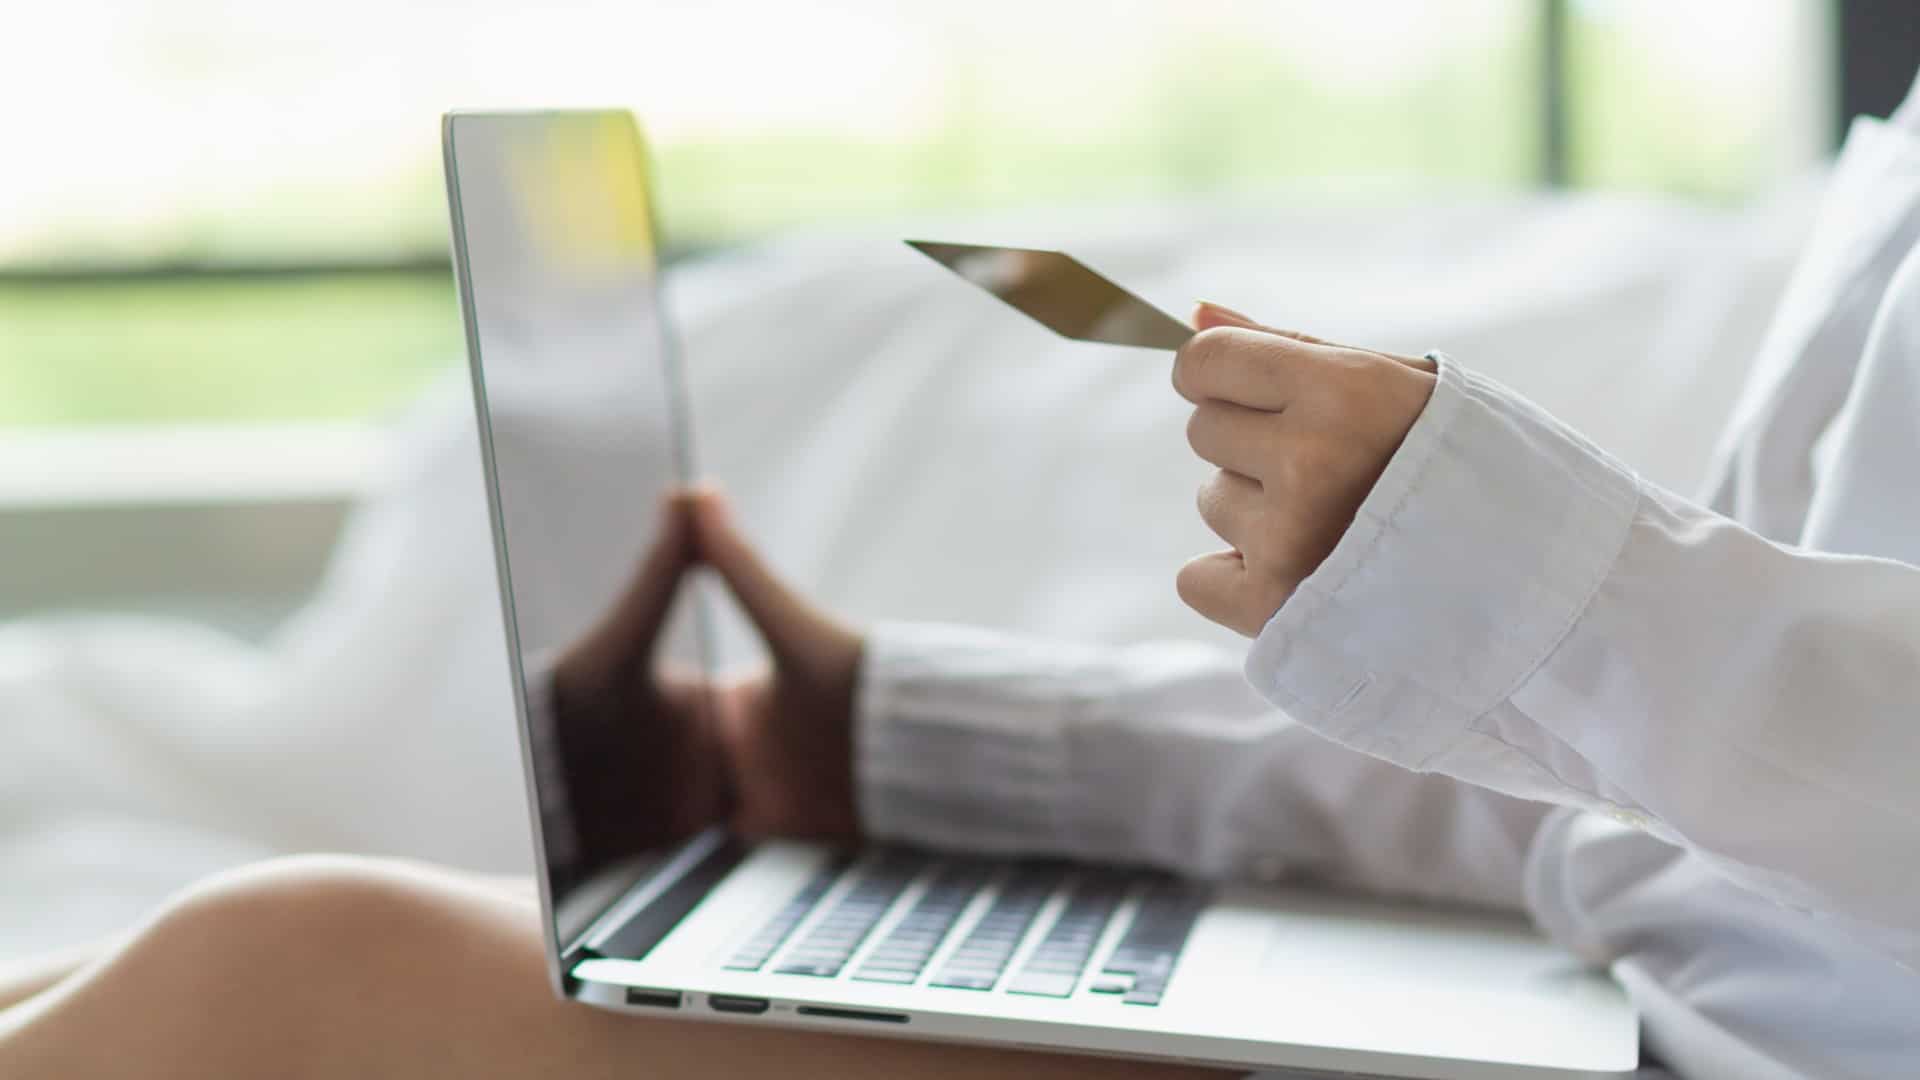 A woman holding a credit card while using a laptop in this image from Shutterstock.